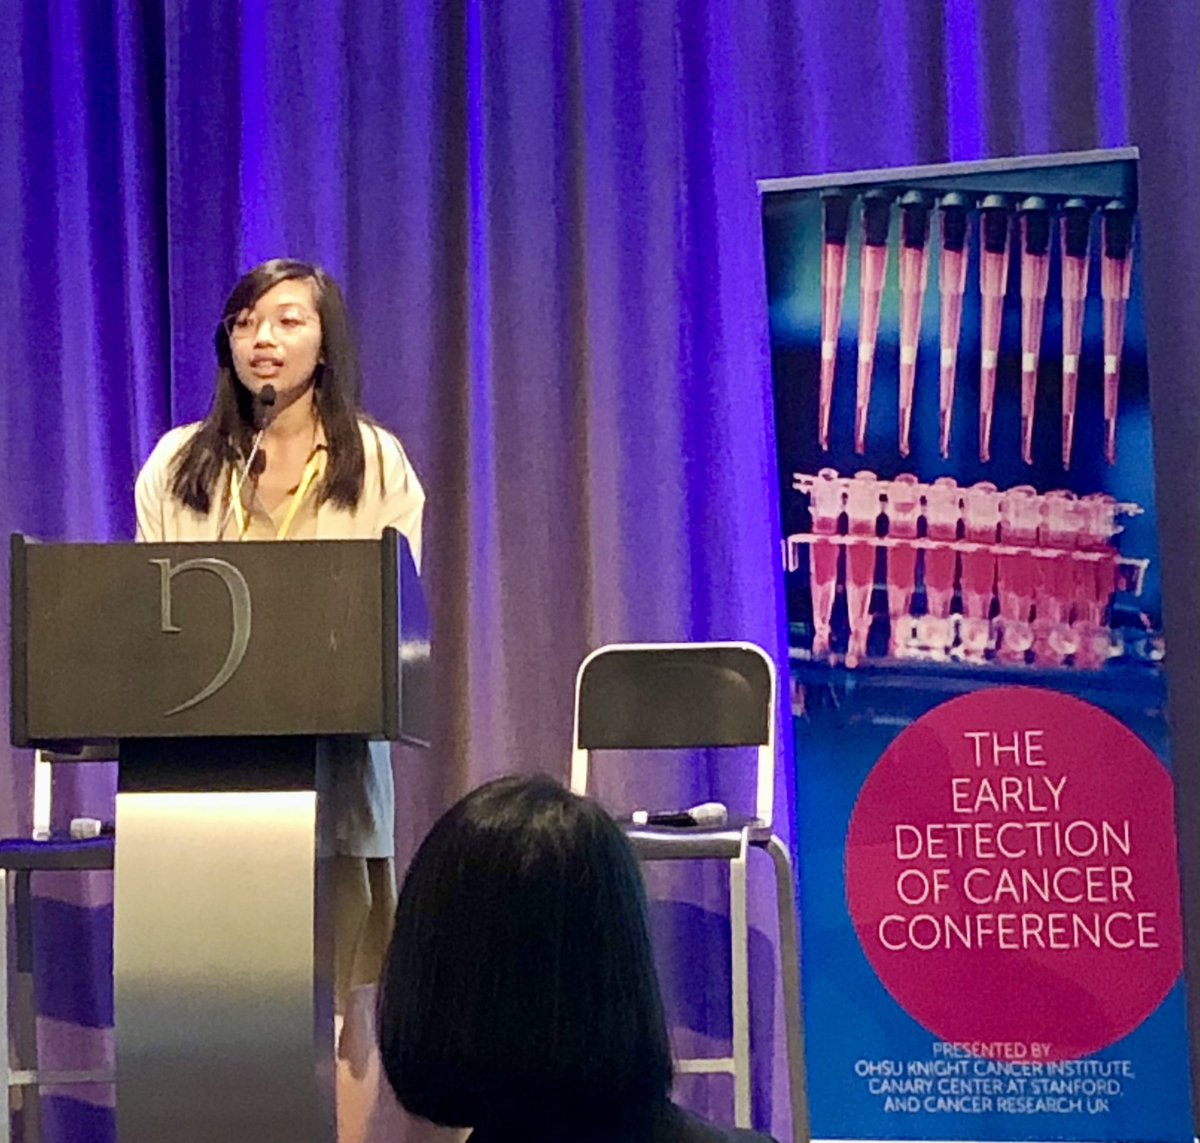 Great lightning talk at #EDxConf22 by Gladys Poon, PhD student in @EarlyCancerCam Blundell Lab @gladyspoon1 @jrblundell